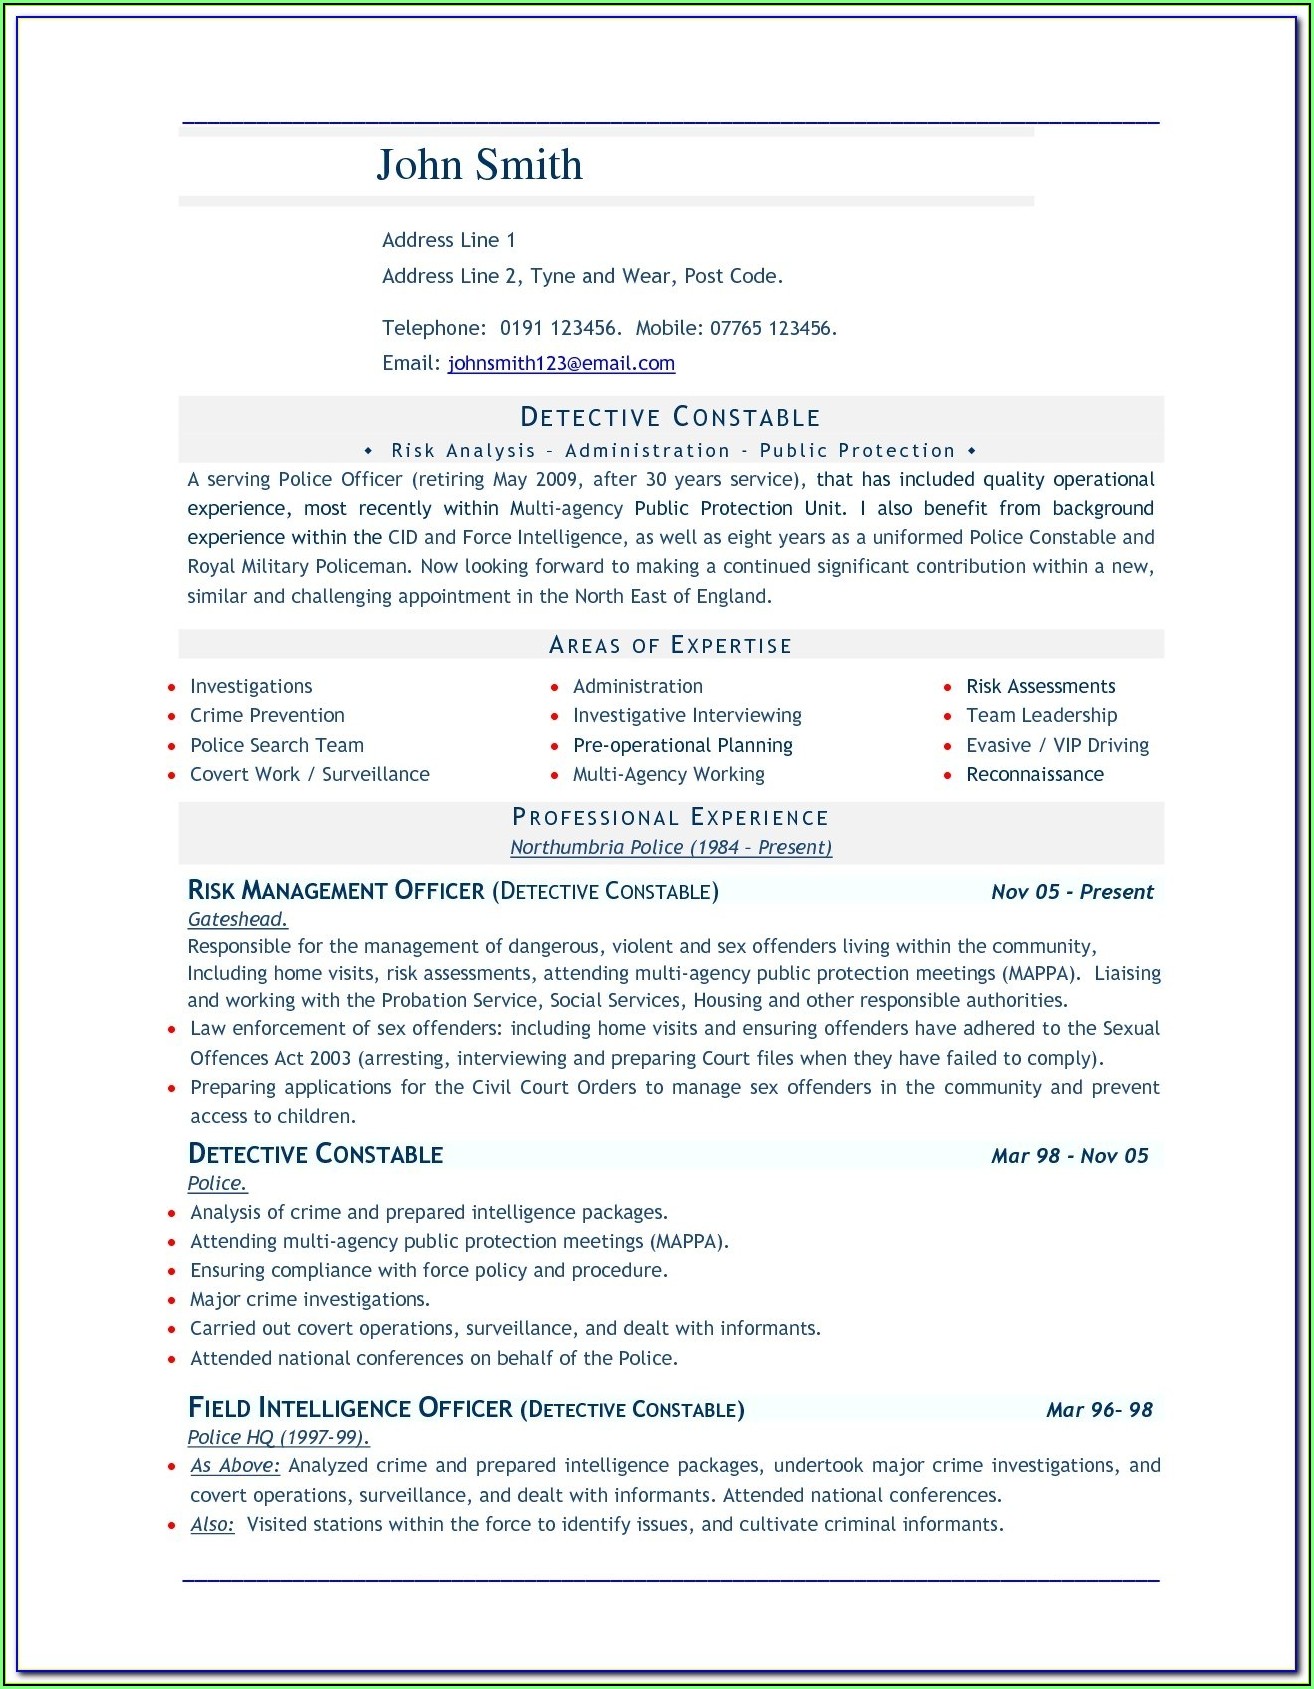 Free Resume Template Download Word 2018